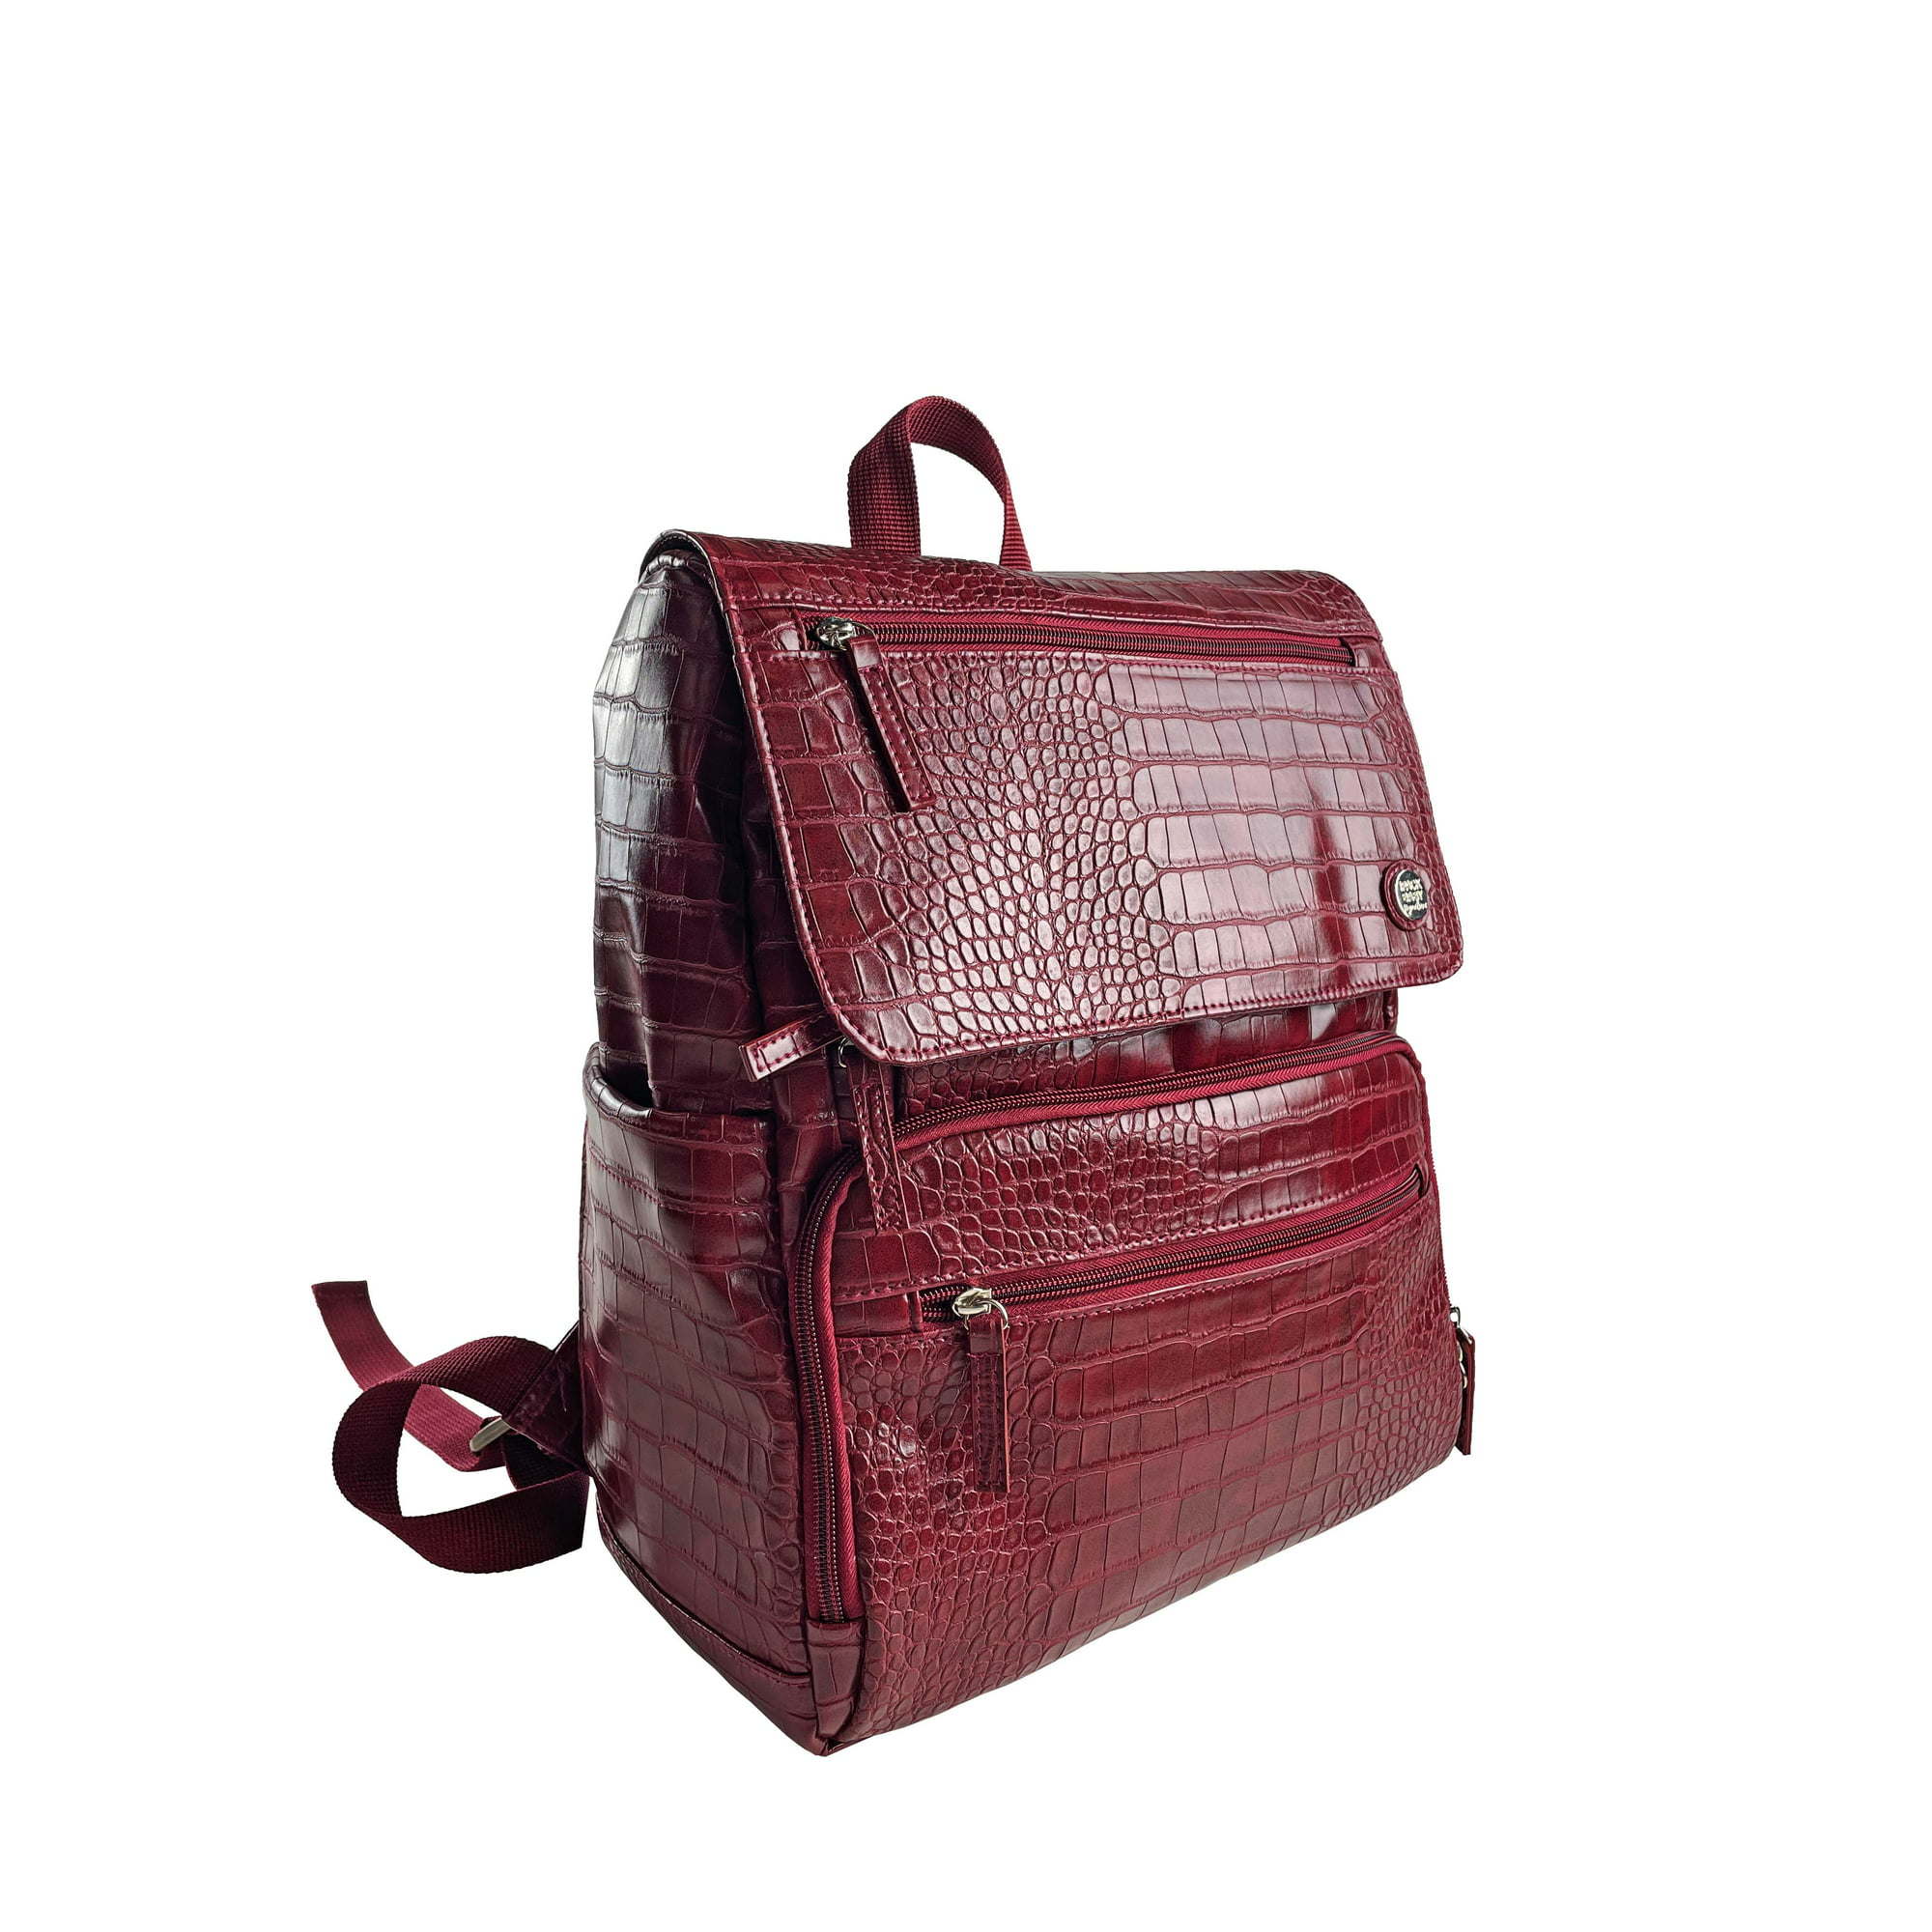 iPack Croc Backpack Diaper Bag with Adjustable Straps and Top Carry Handle, Maroon